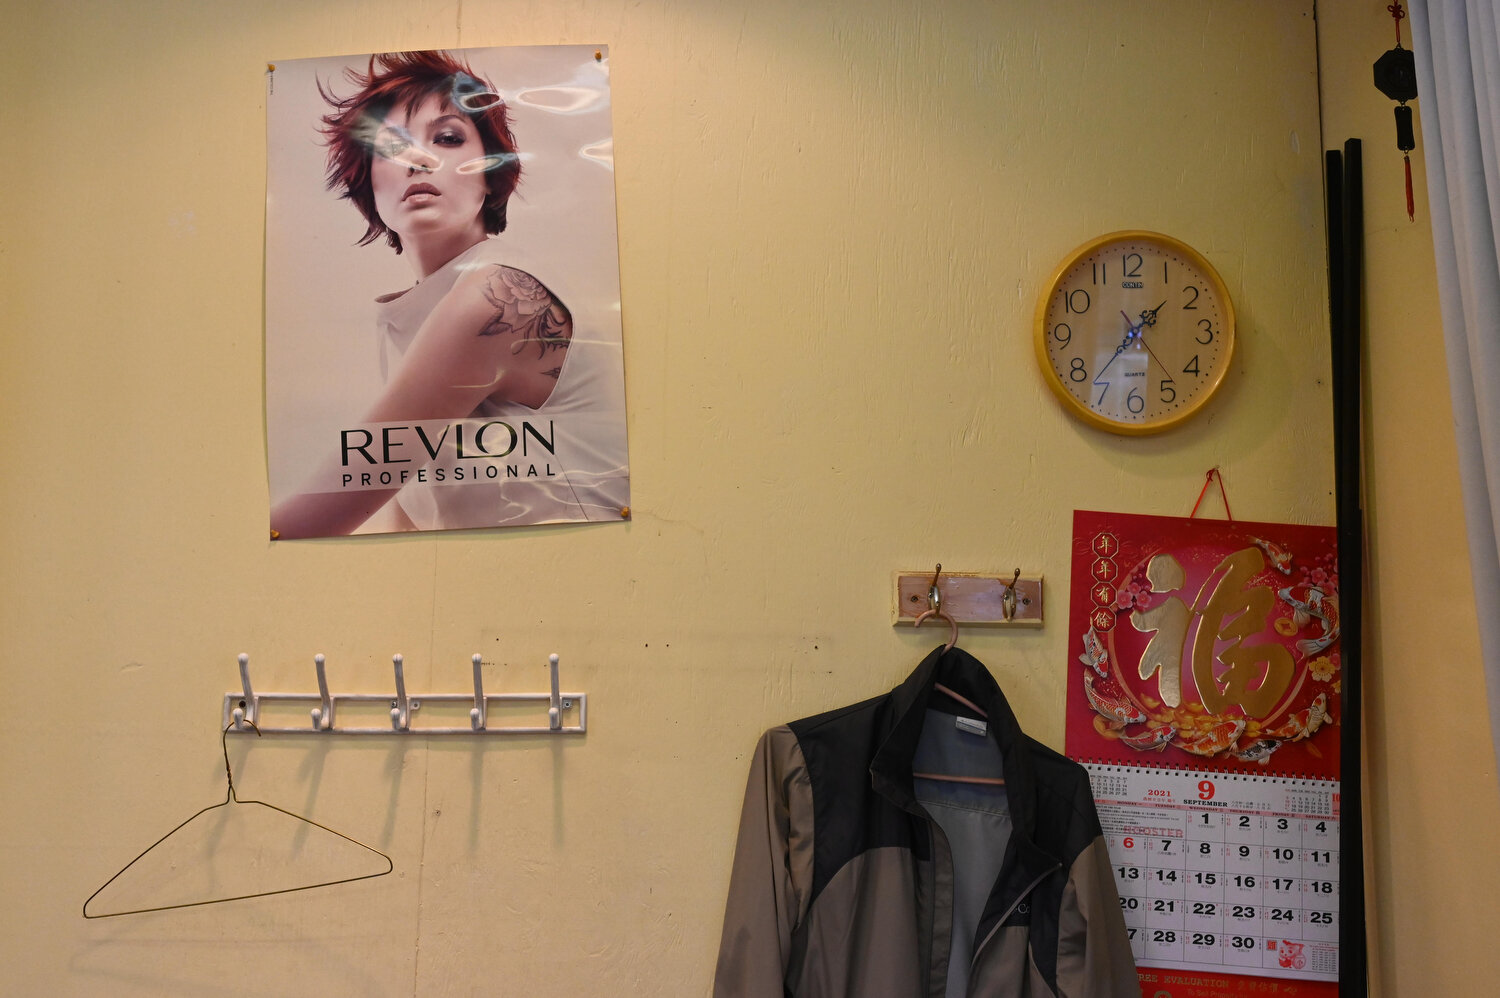  A common sight on Wong’s side of the salon, where the coat rack sits empty, and time passes slowly. “Since Covid-19 started, my senior customers don’t venture out anymore. Their children want them home to keep them safe. But when they do come, I wan